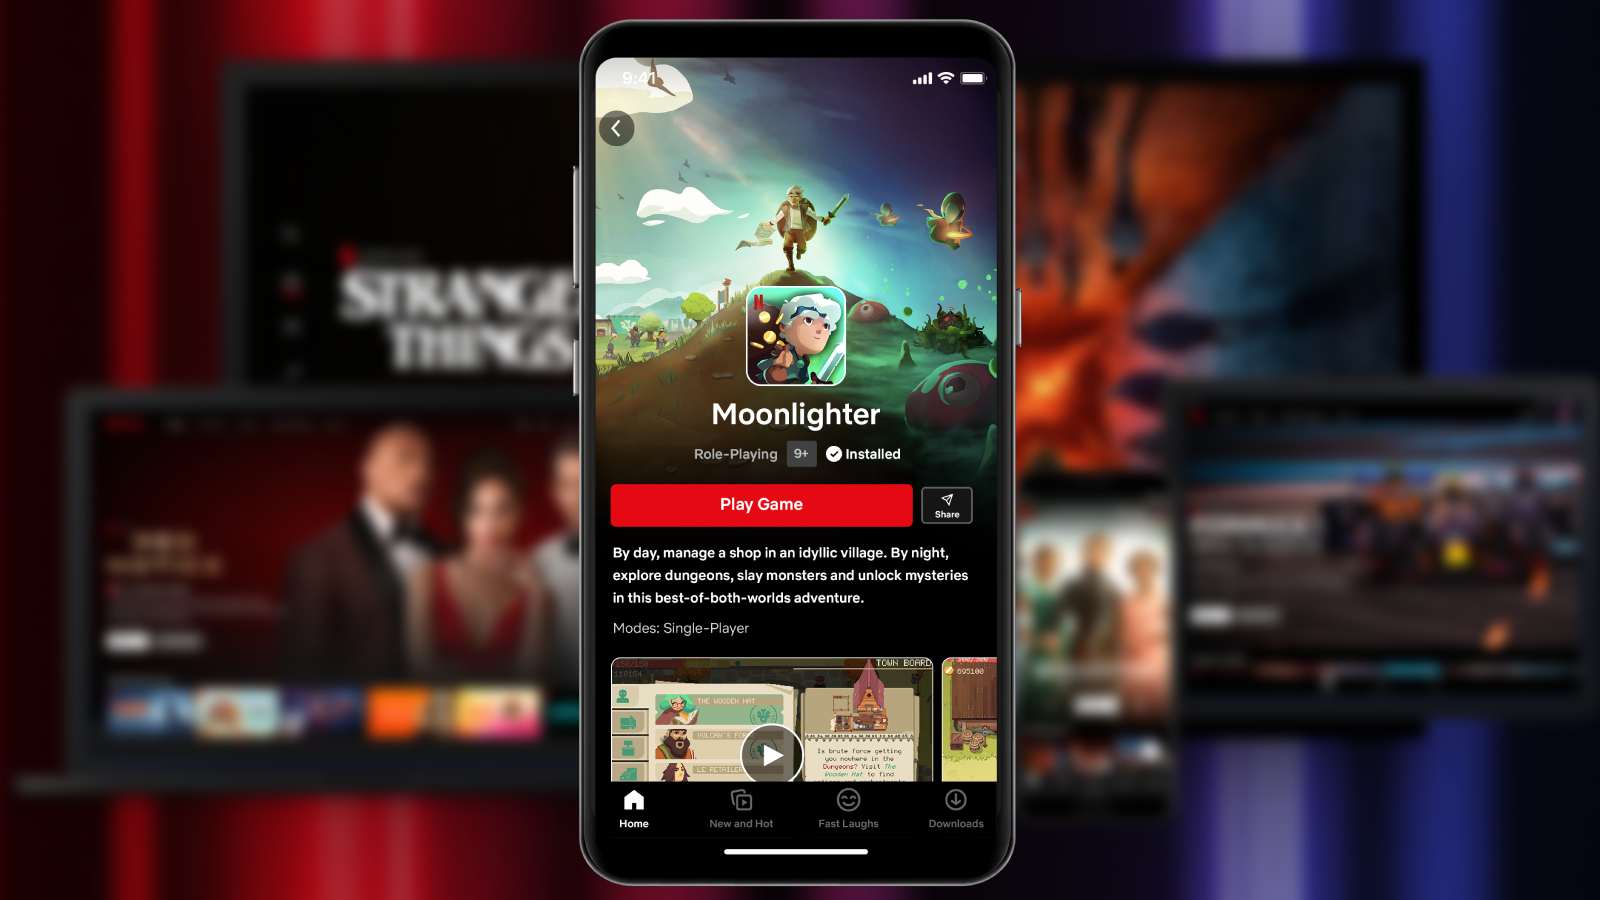 Netflix Gets Fancy New Web Video Player, Lures Old Subscribers Back